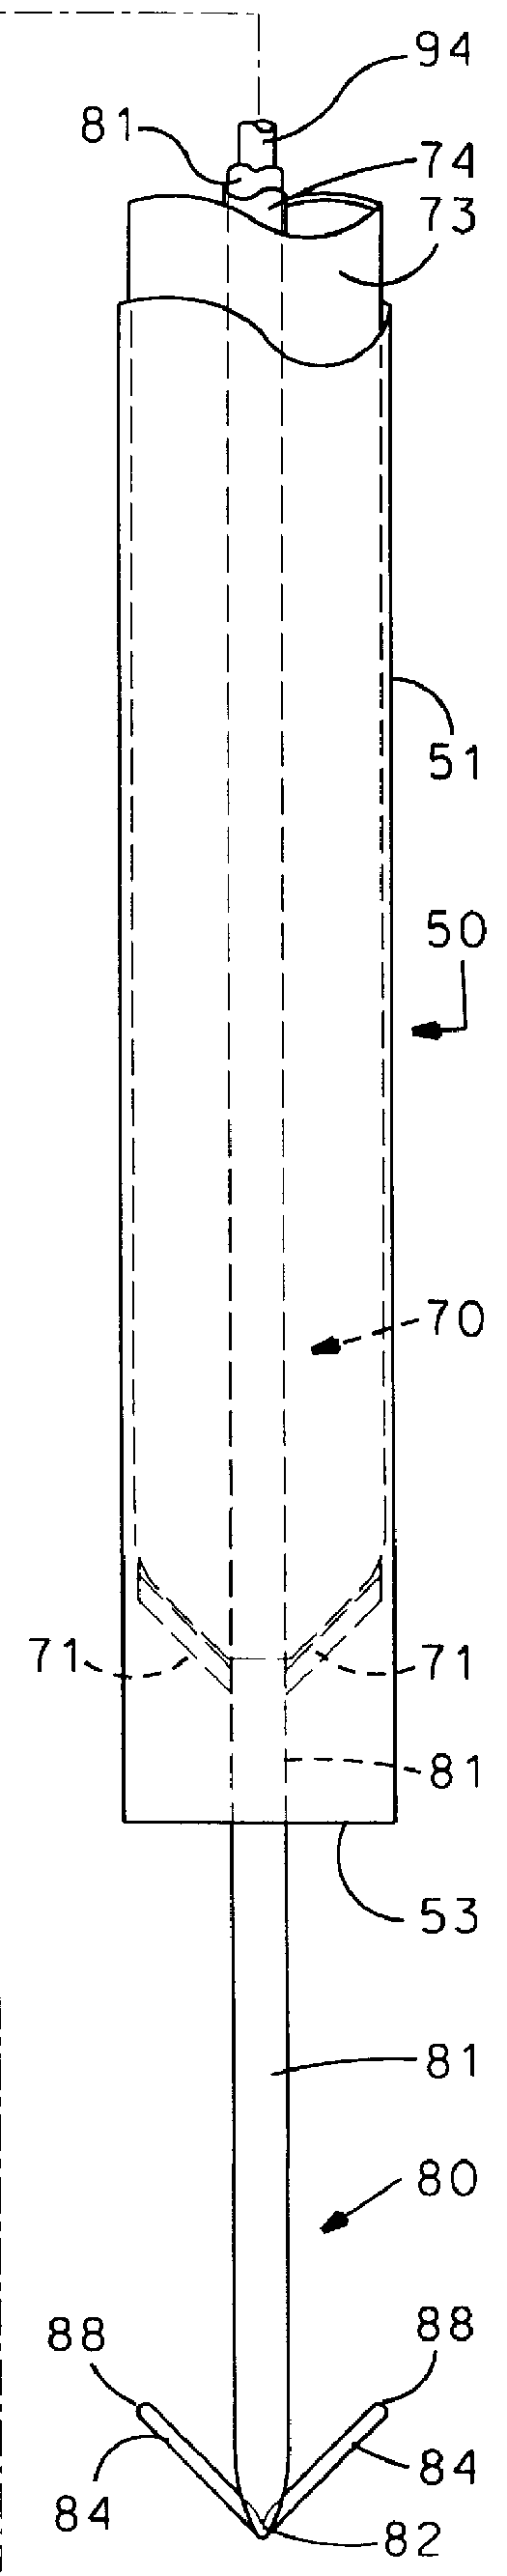 Apparatus and methods for the penetration of tissue, and the creation of an opening therein